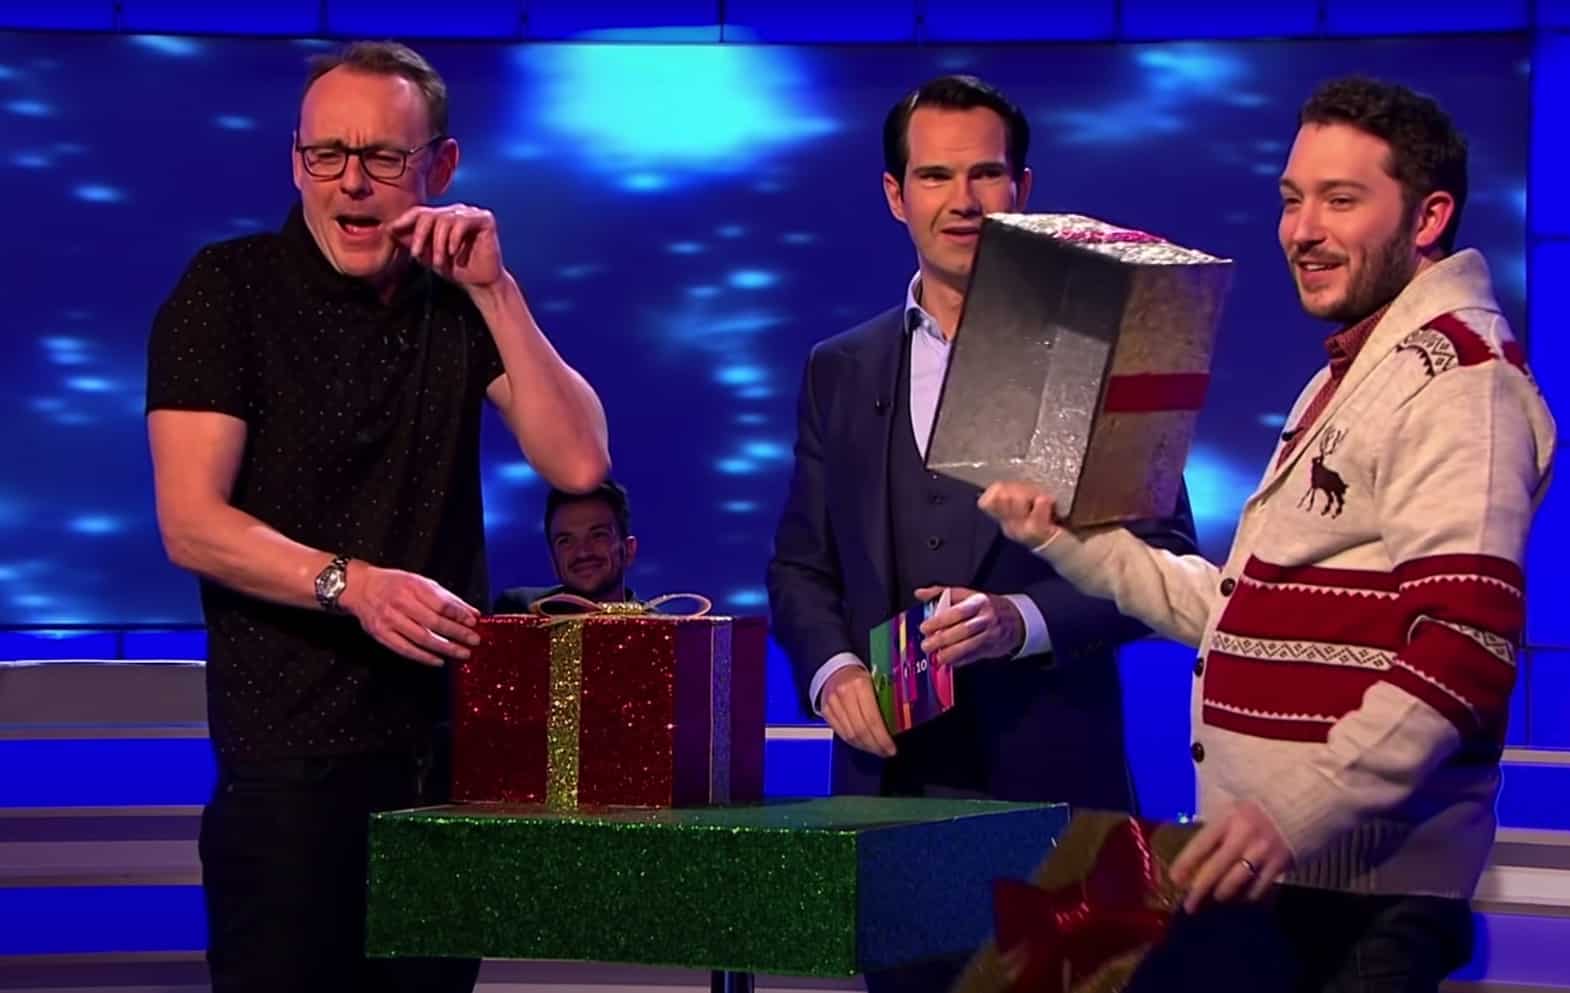 A reminder of Sean Lock’s brilliance one year on from his passing